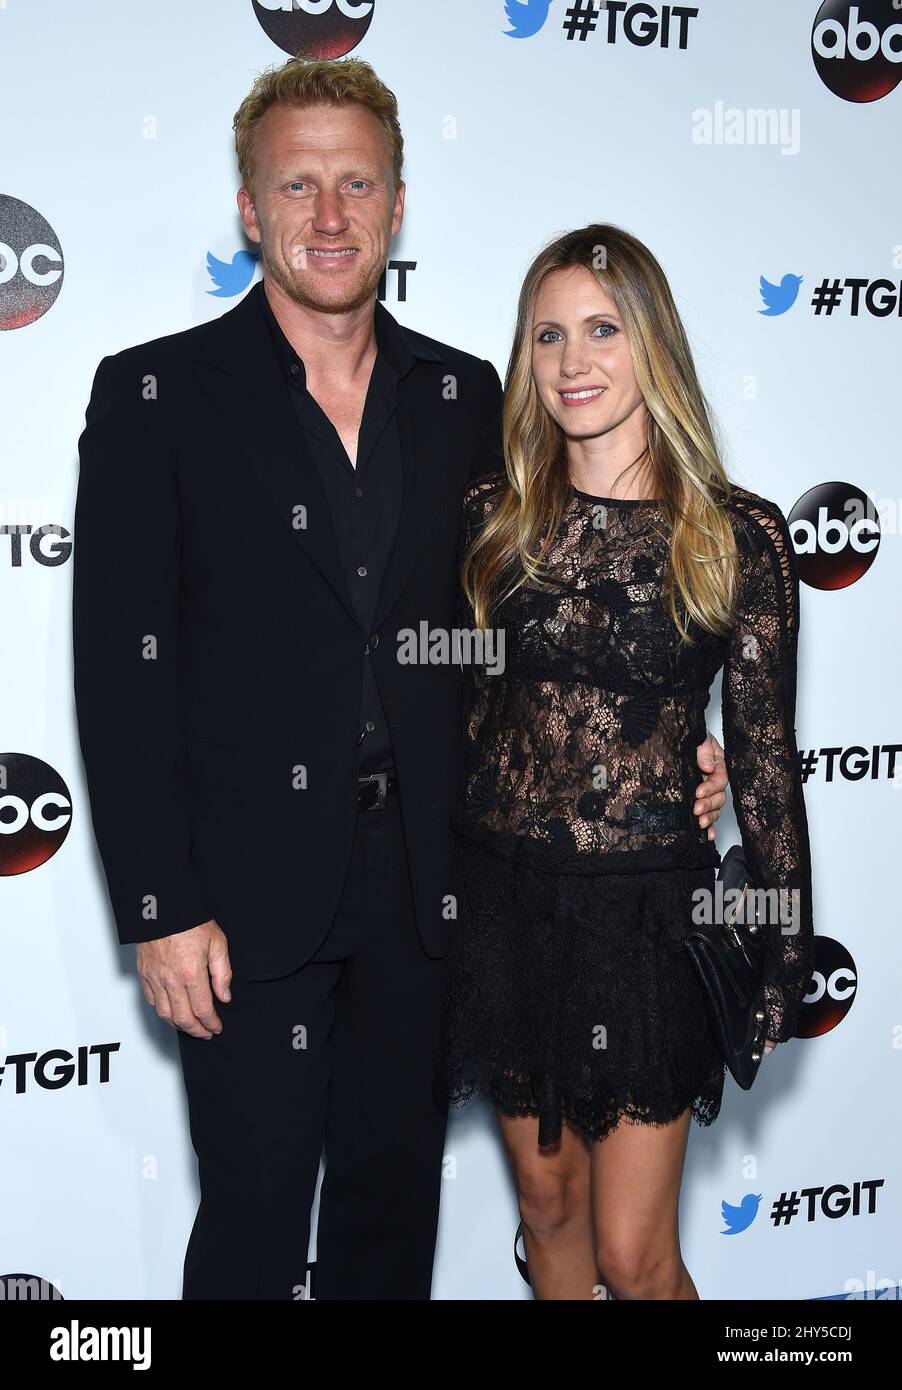 Kevin McKidd & Jane Parker arriving for the TGIT Premiere Event of ABC's Grey's Anatomy, Scandal & How To Get Away With Murder at the Palihouse, Hollywood, Los Angeles, September 20, 2014. Stock Photo